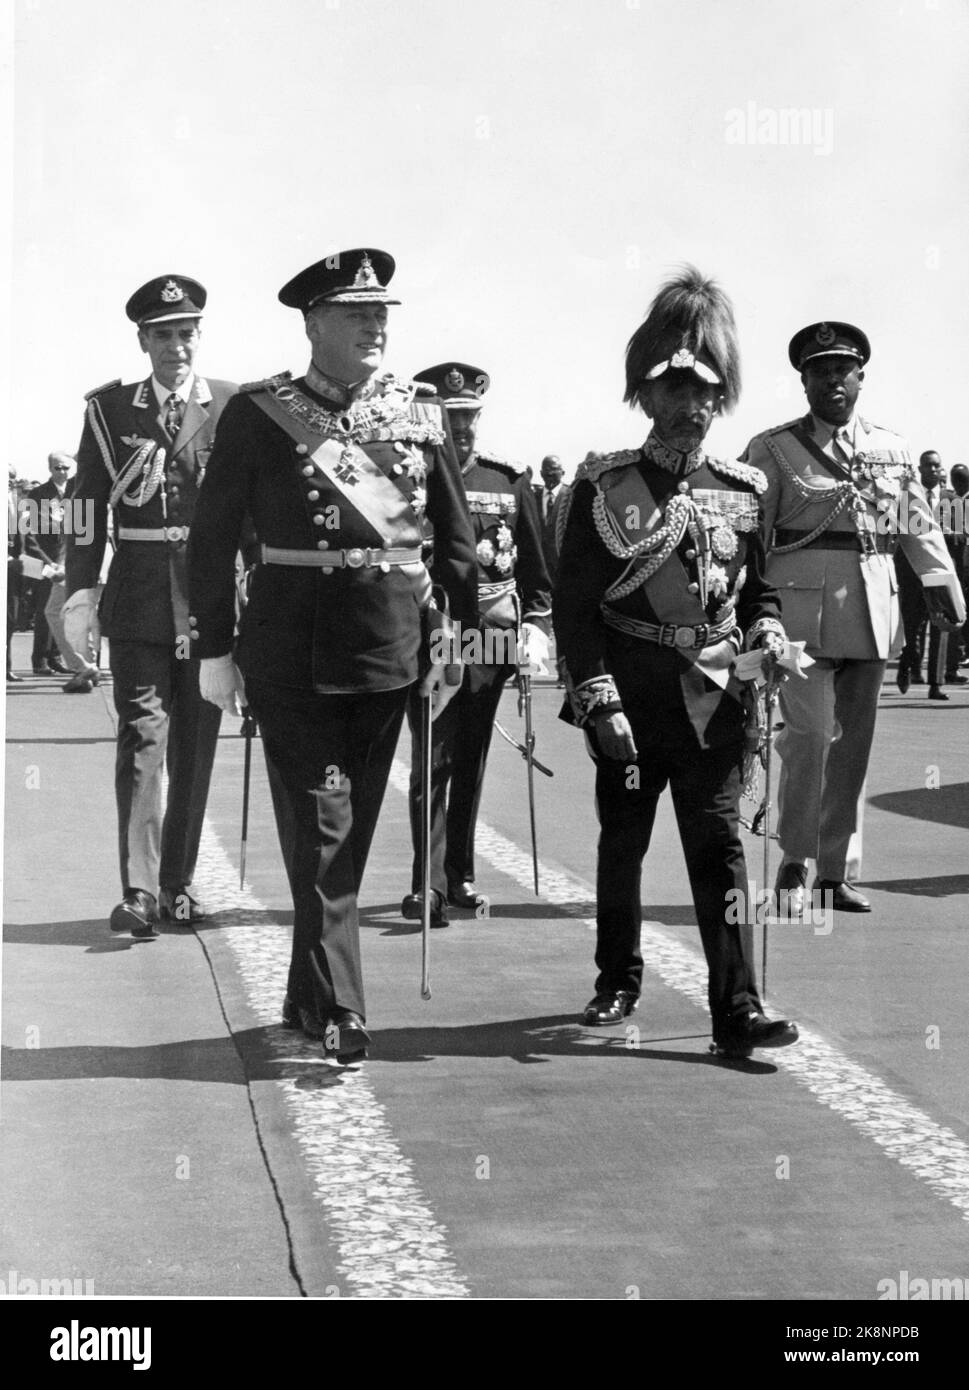 Ethiopia 1966. King Olav visits Ethiopia in January 1966. Here King Olav (TV) inspects troops with Emperor Haile Selassie. Photo: Henrik Laurvik / NTB. Stock Photo